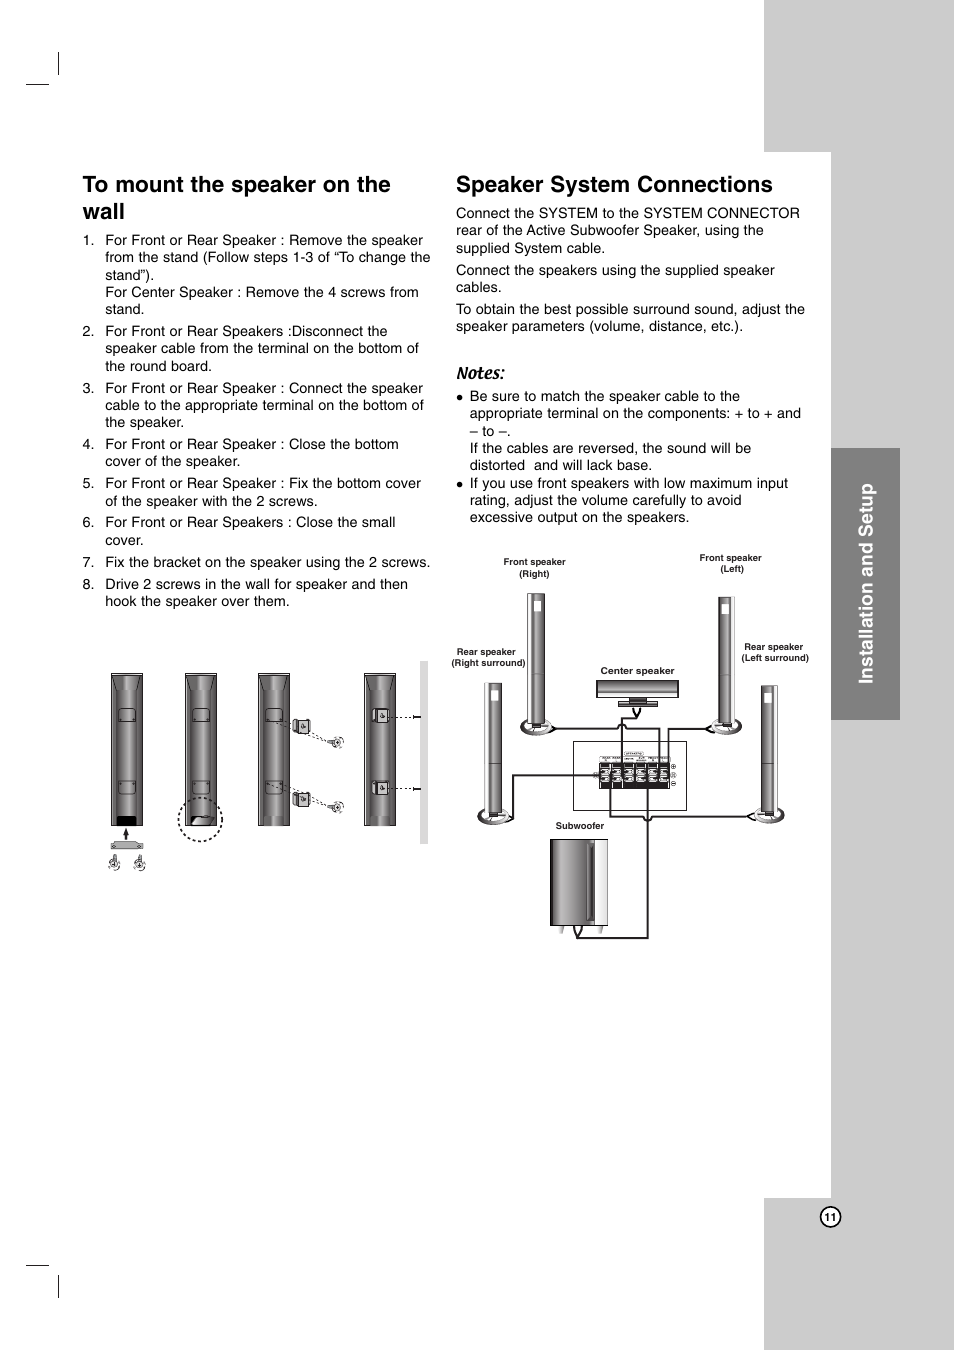 Speaker system connections, Installation and setup | LG LH-T755 User Manual | Page 11 / 29